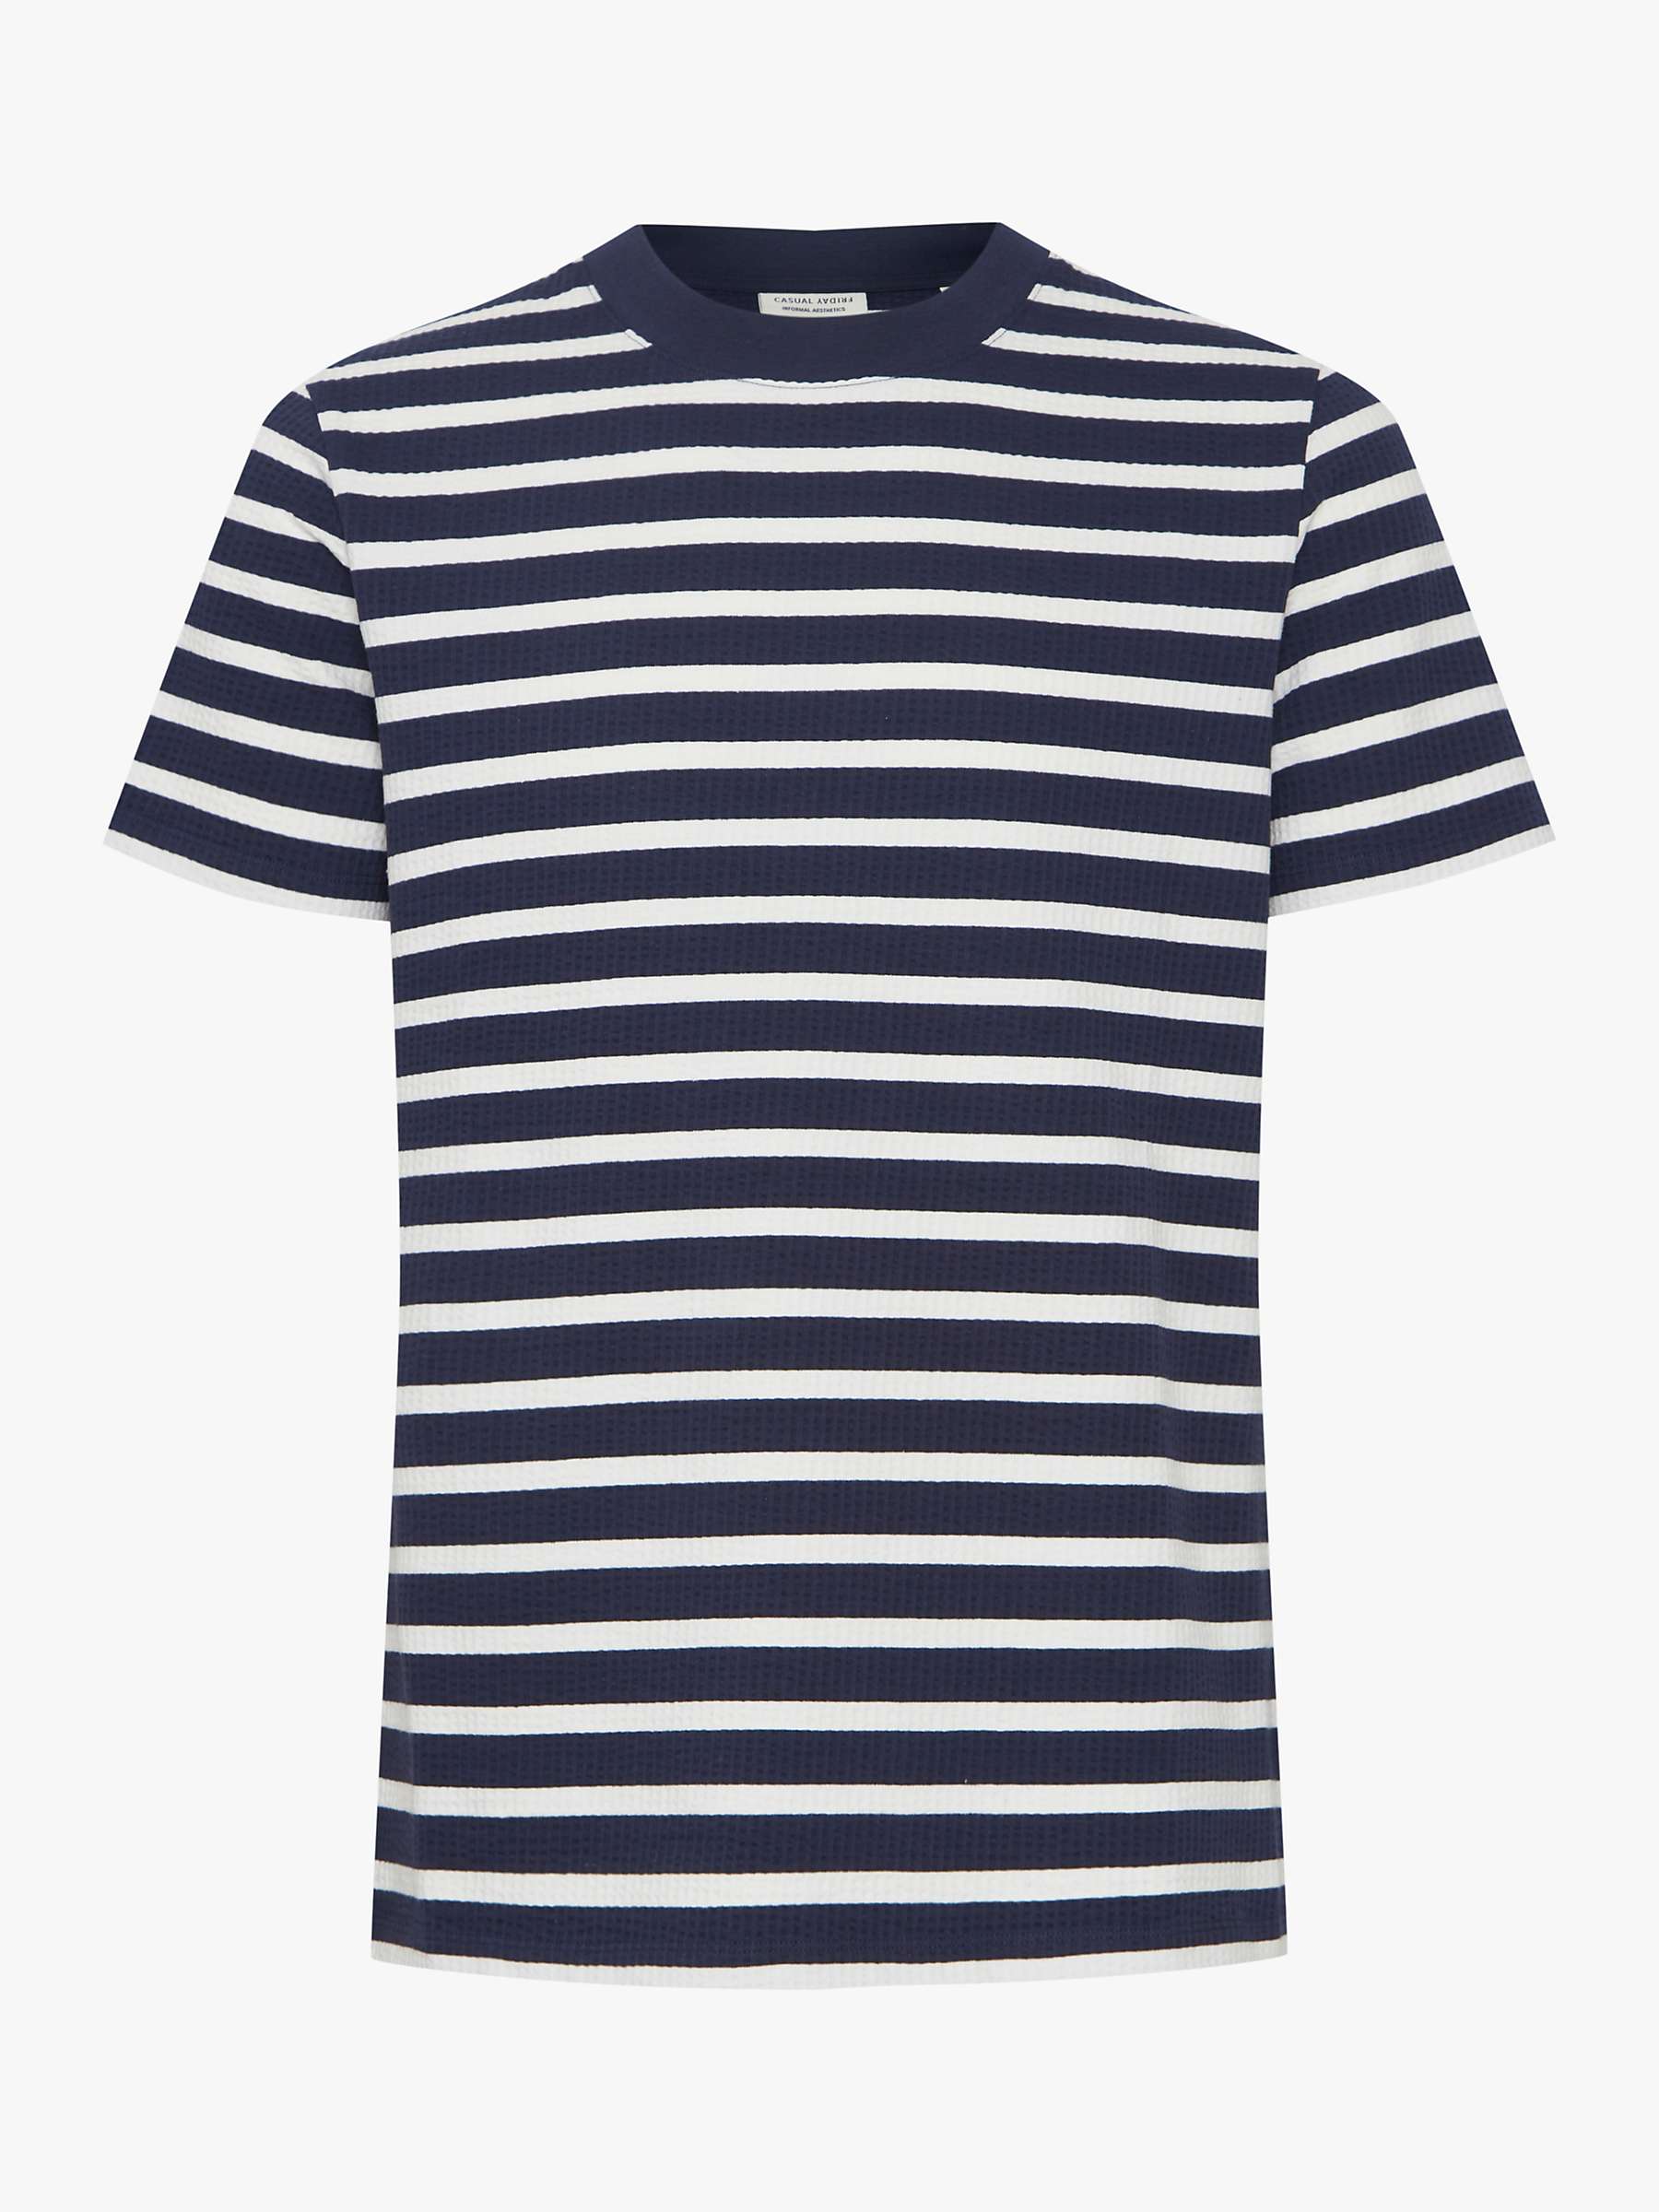 Buy Casual Friday Thor Striped Short Sleeve T-Shirt Online at johnlewis.com